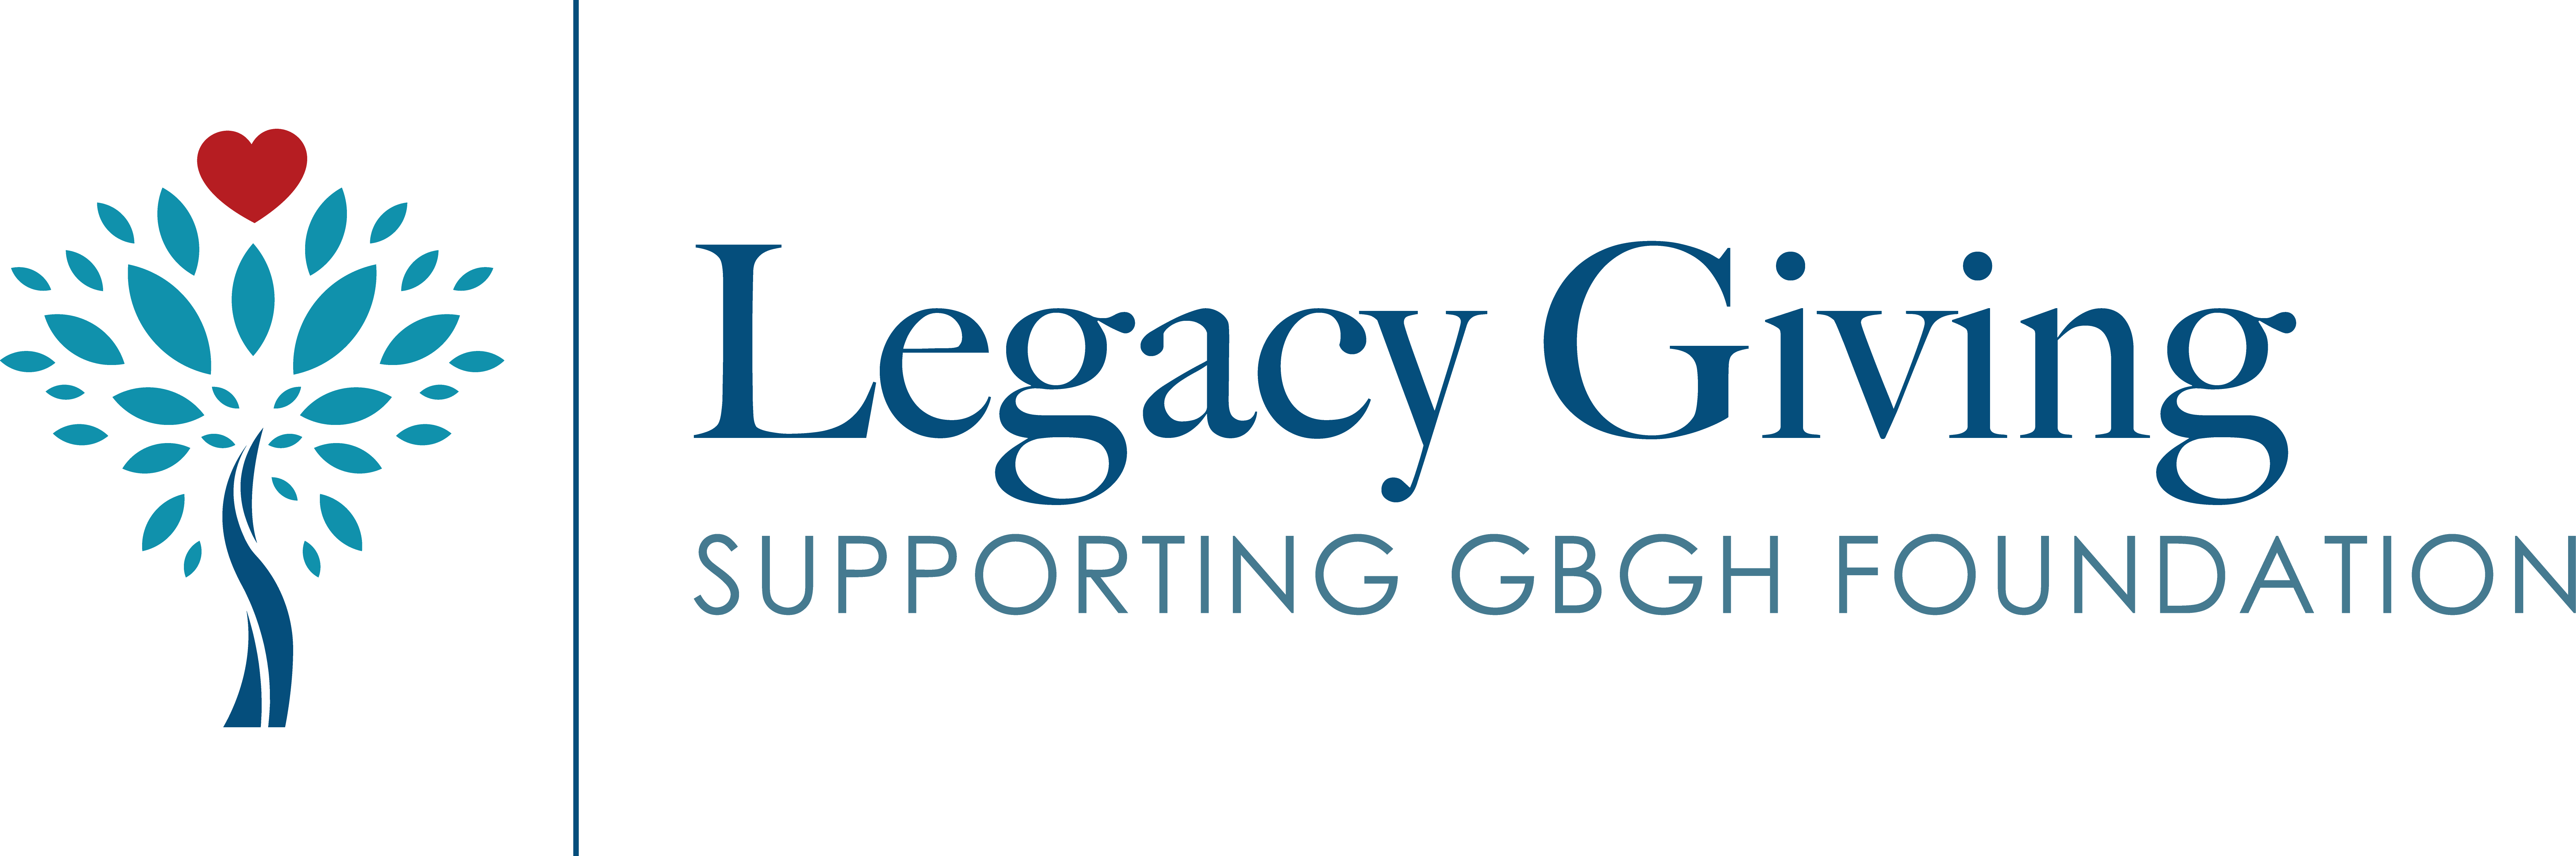 Legacy Giving Supporting GBGH Foundation with a blue tree to the left that has a red heart on top